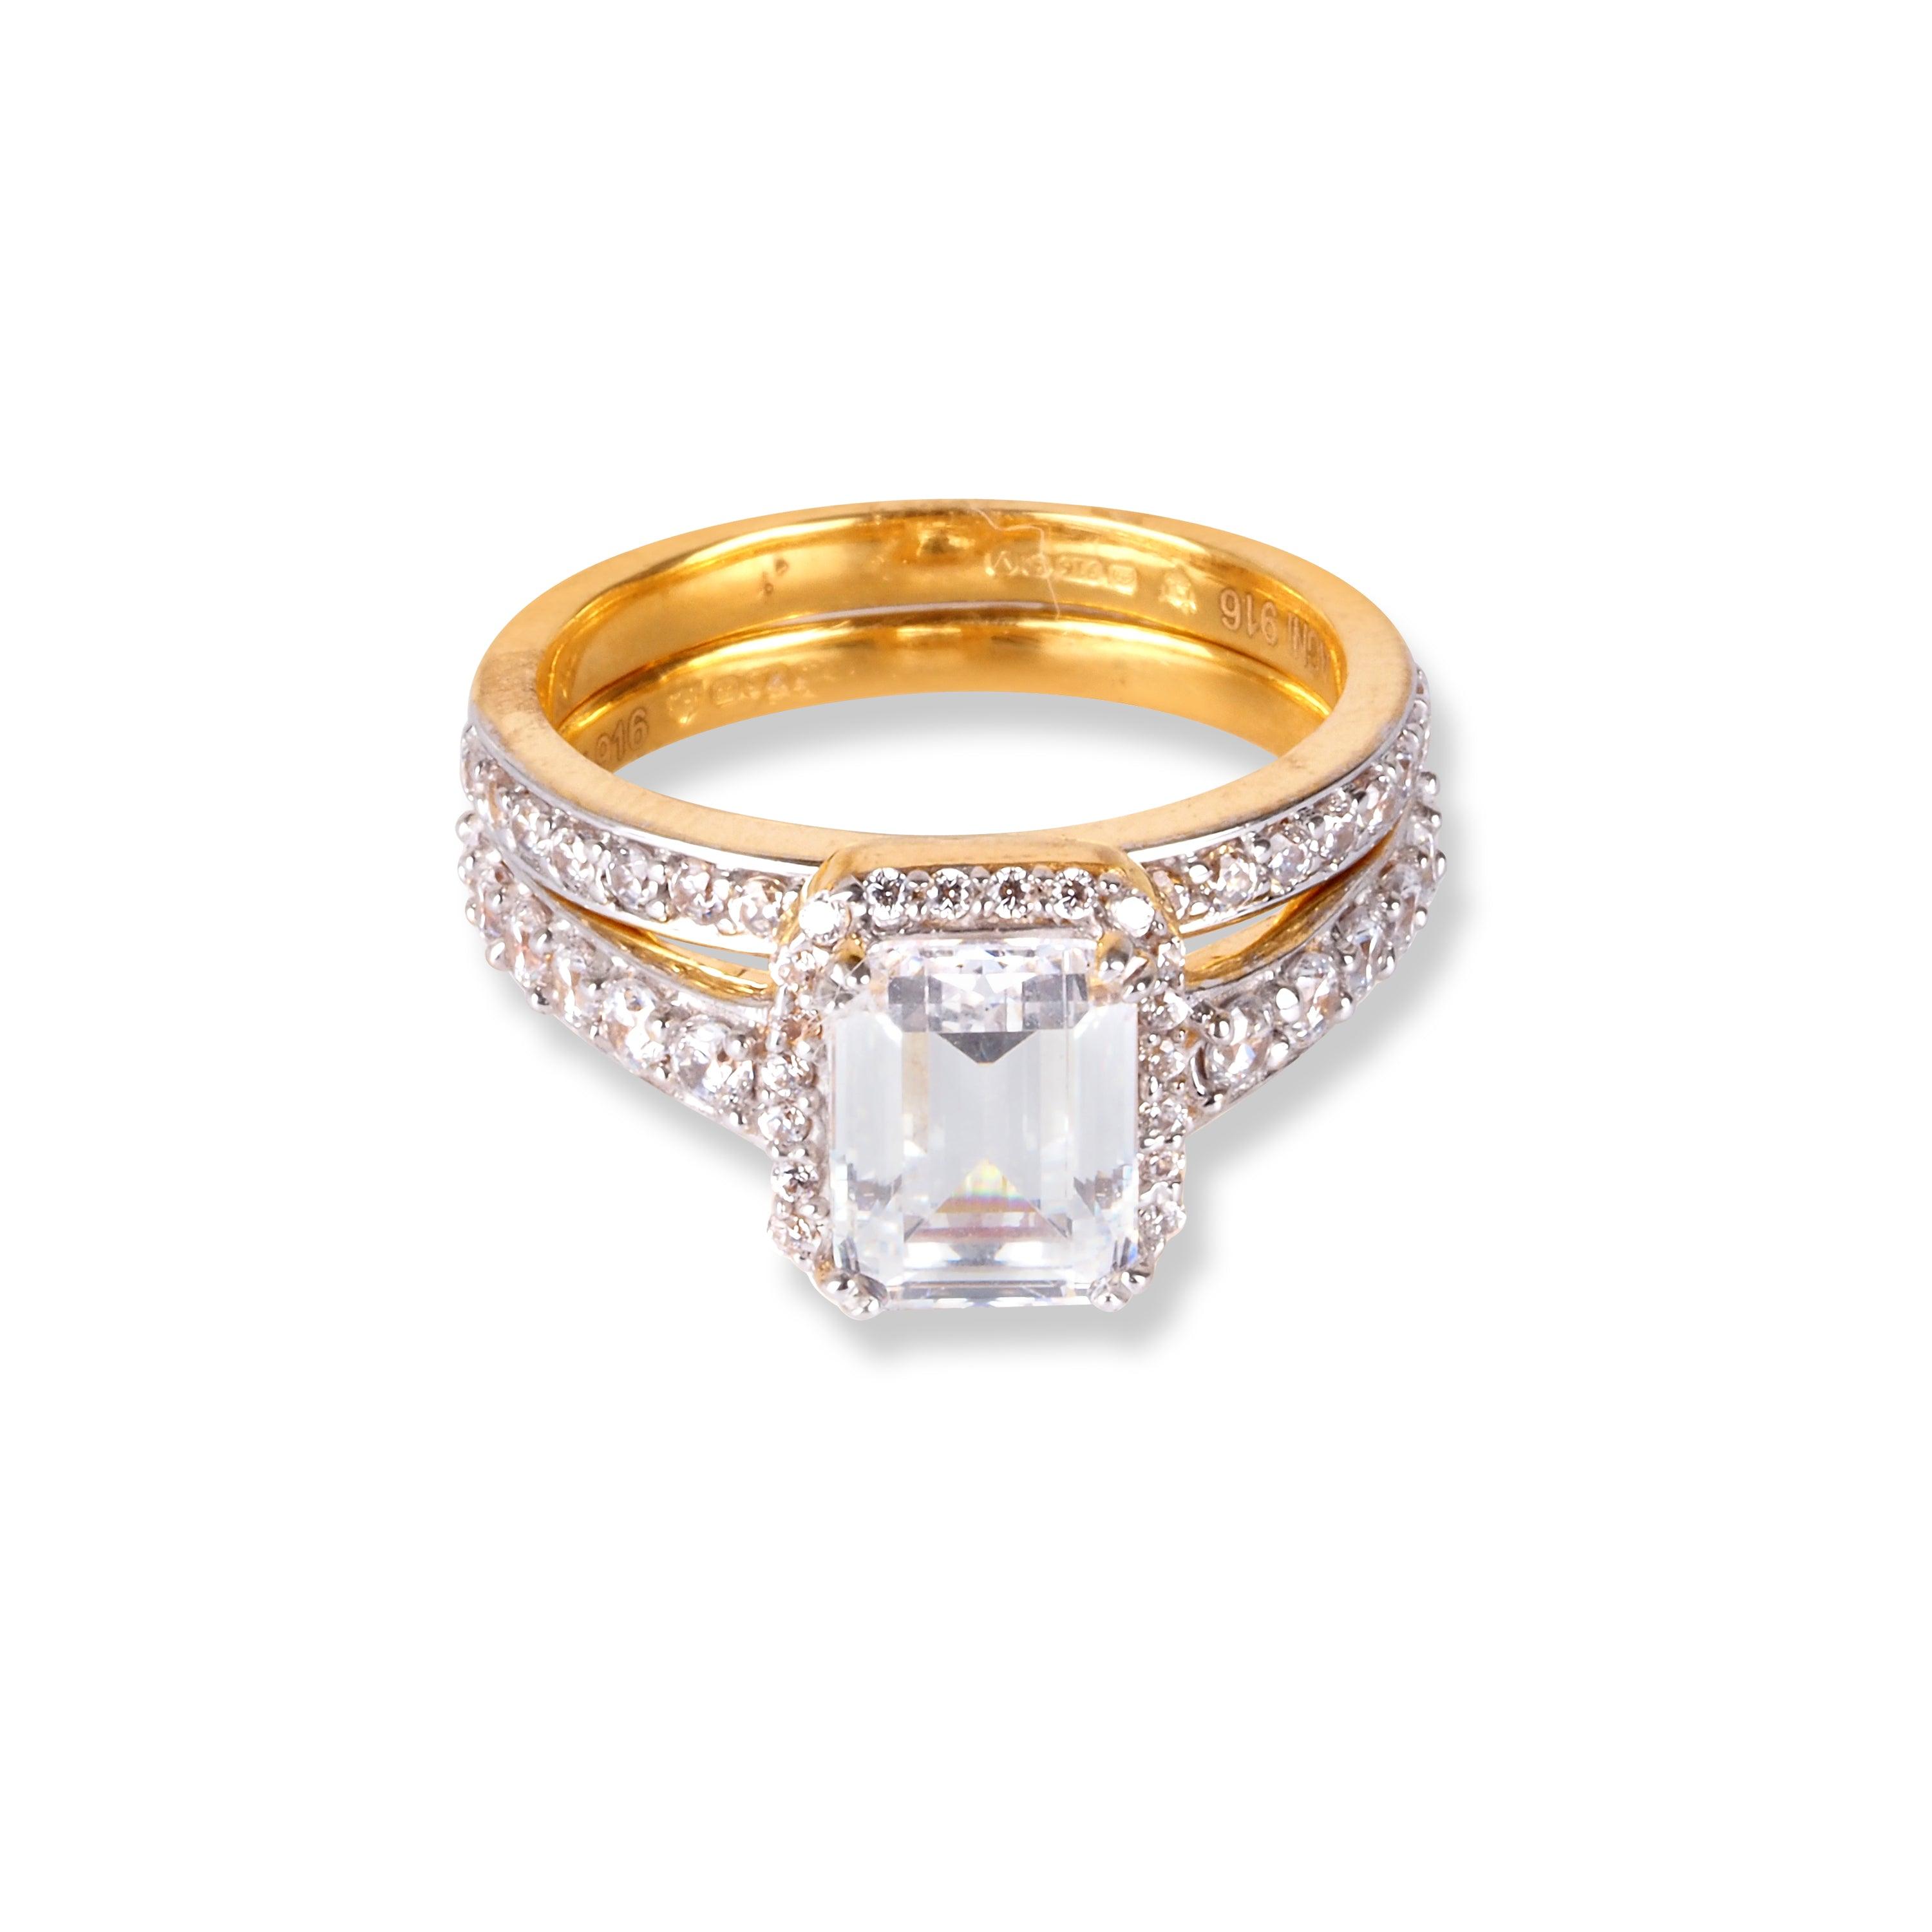 22ct Gold Engagement Ring and Wedding Band Set with Swarovski Zirconia Stones LR-6634 - Minar Jewellers